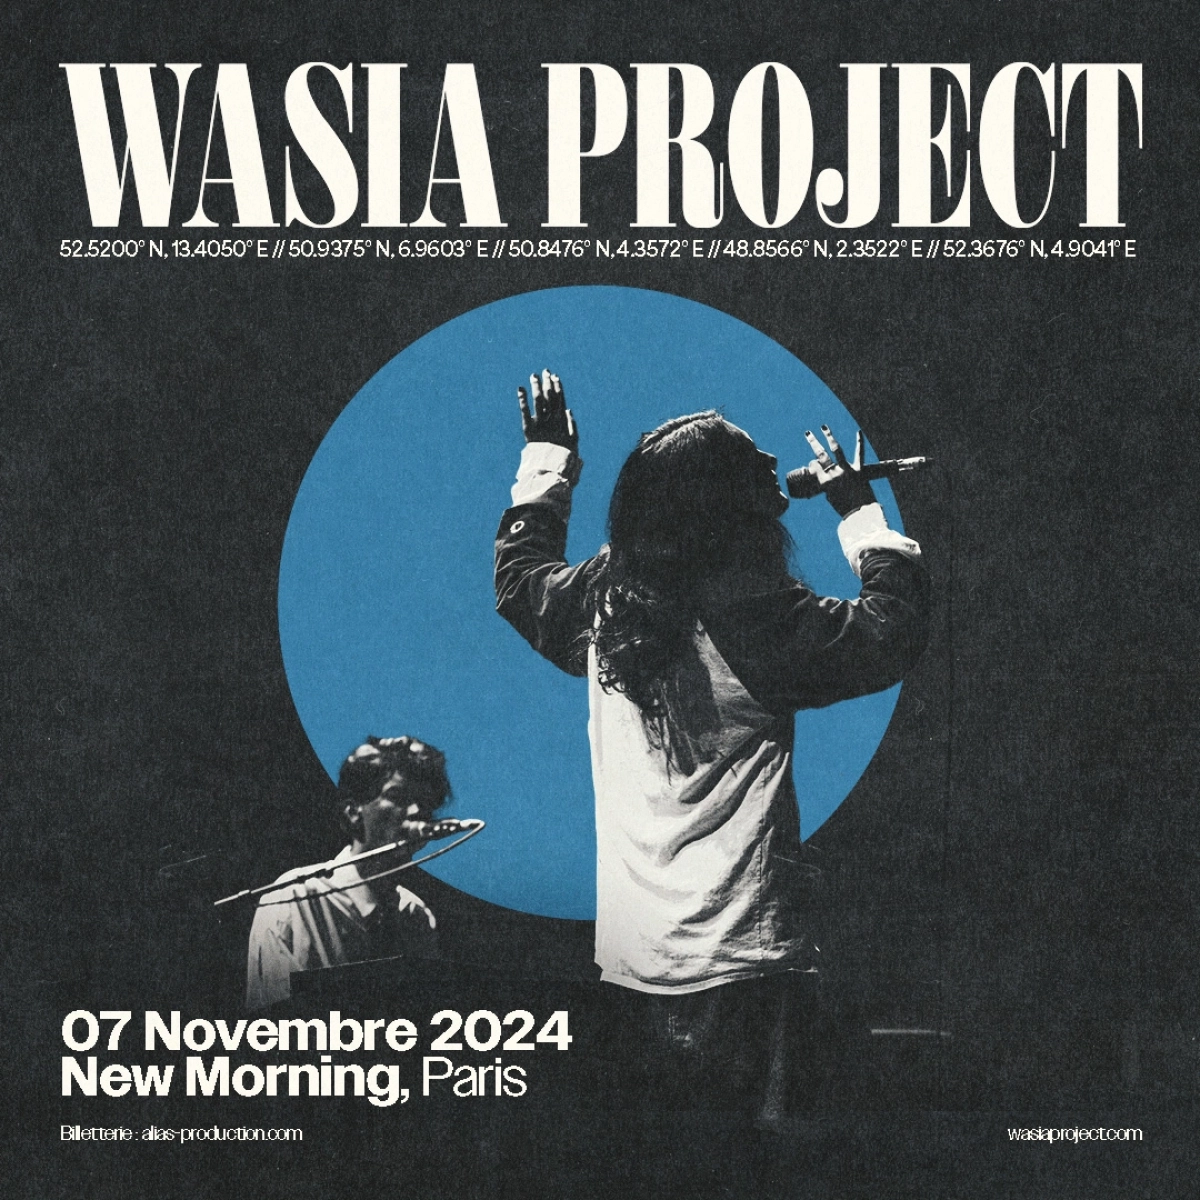 Wasia Project al New Morning Tickets